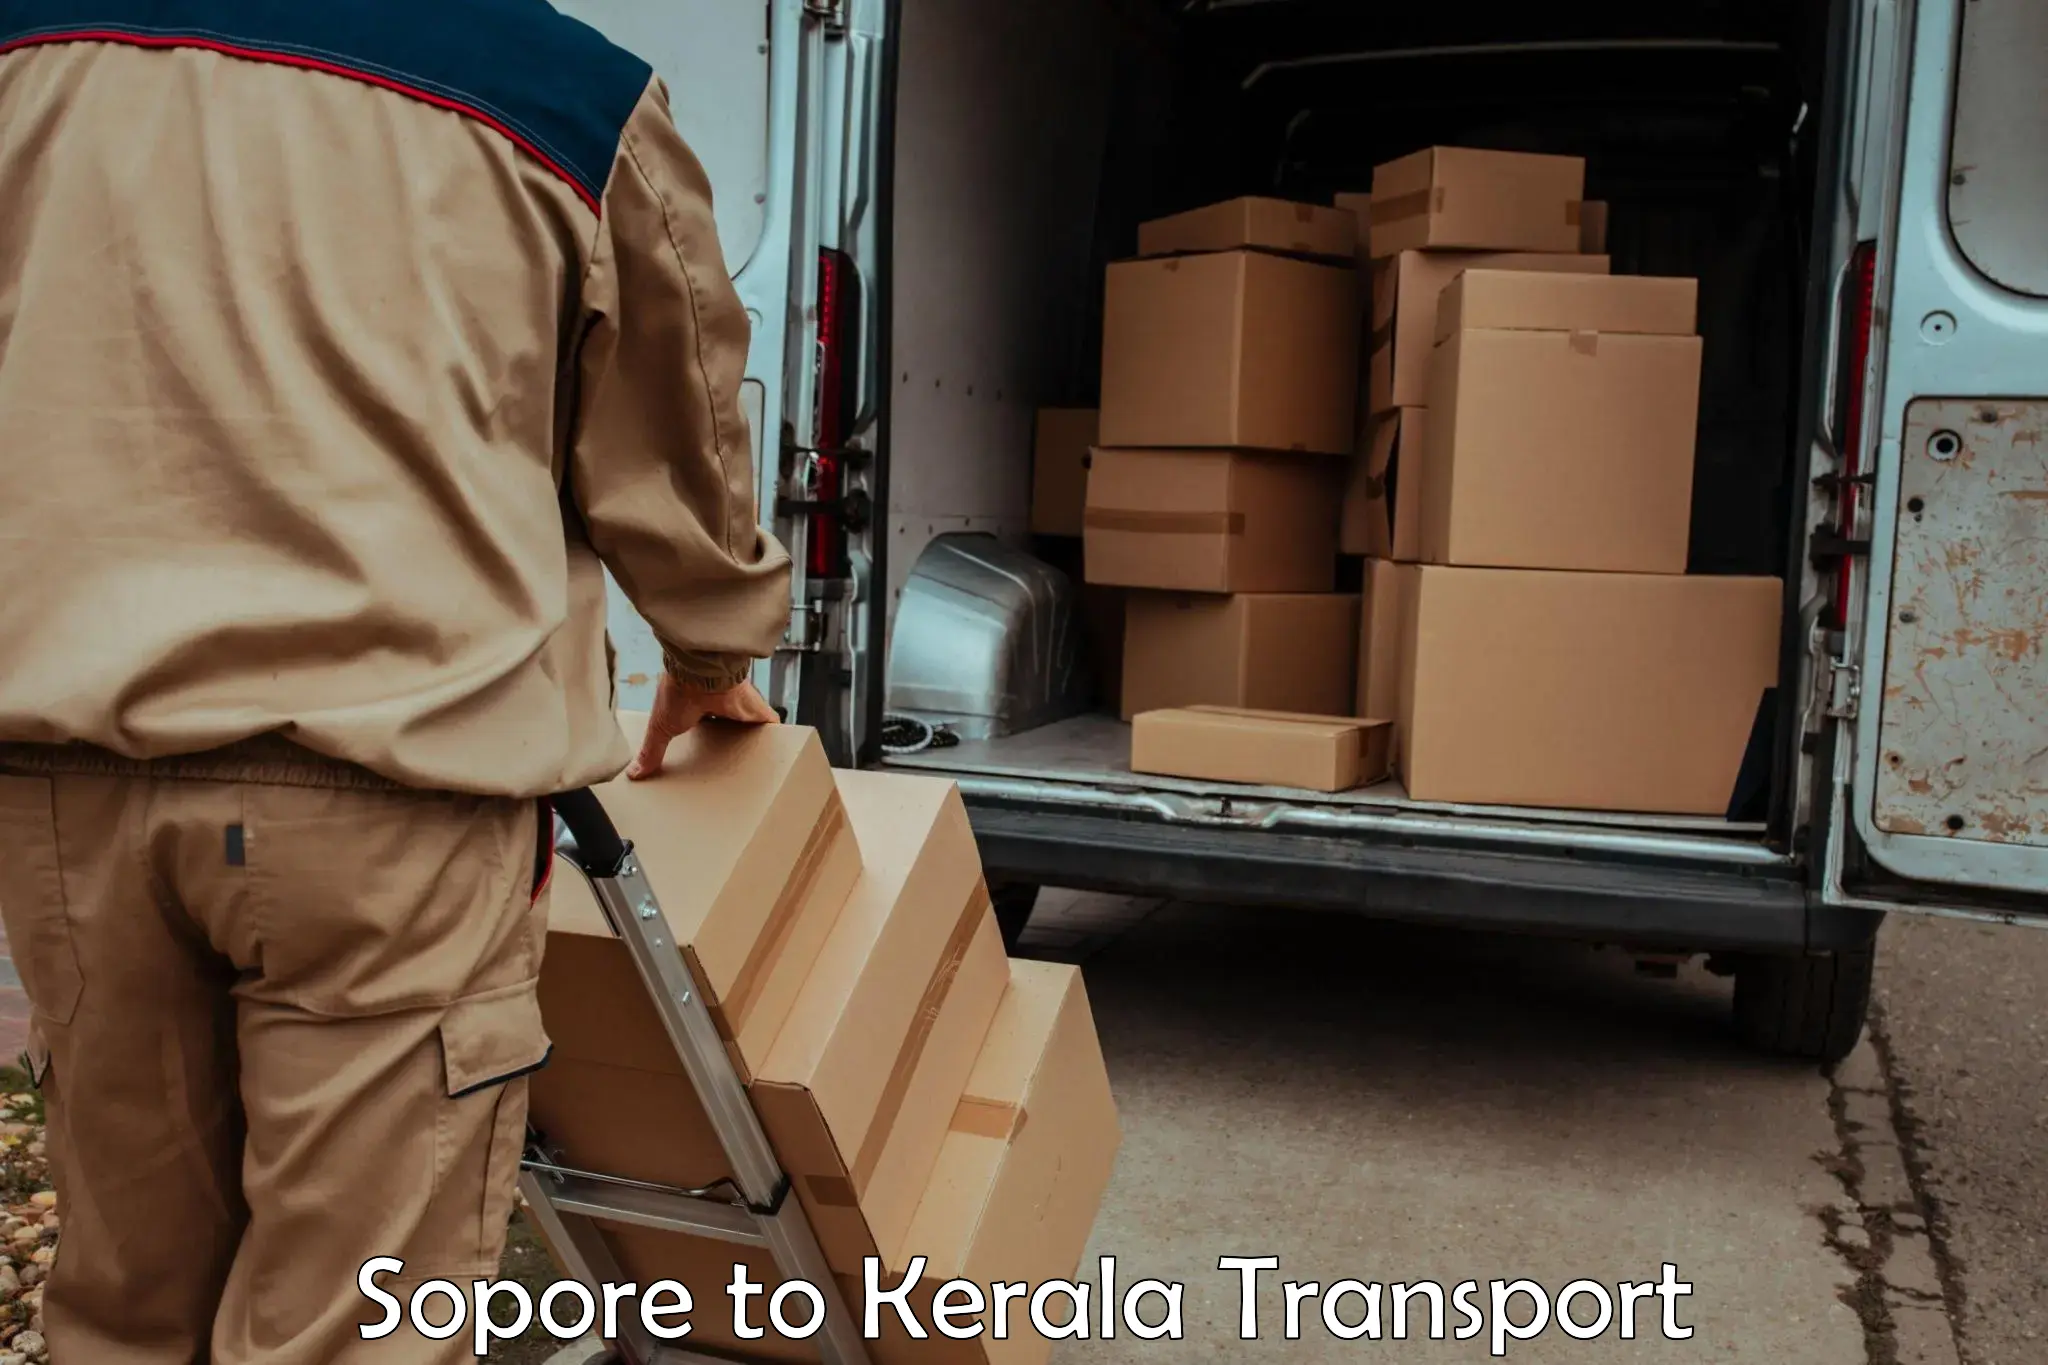 Air freight transport services Sopore to Kayamkulam